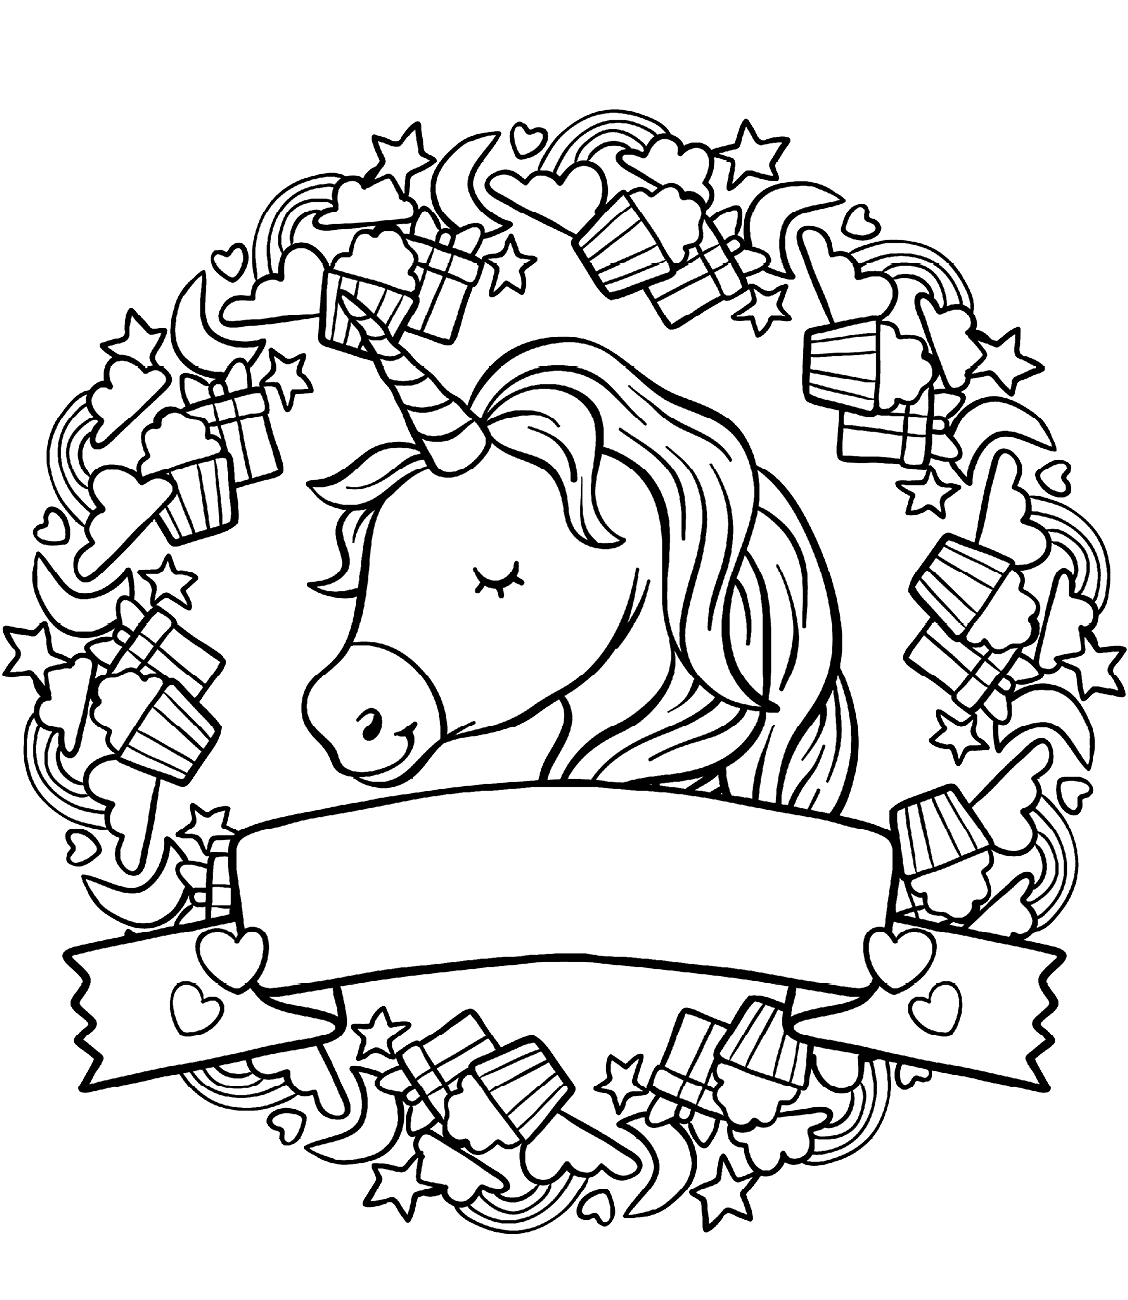 Happy Face Unicorn Coloring Page   Free Printable Coloring Pages ...